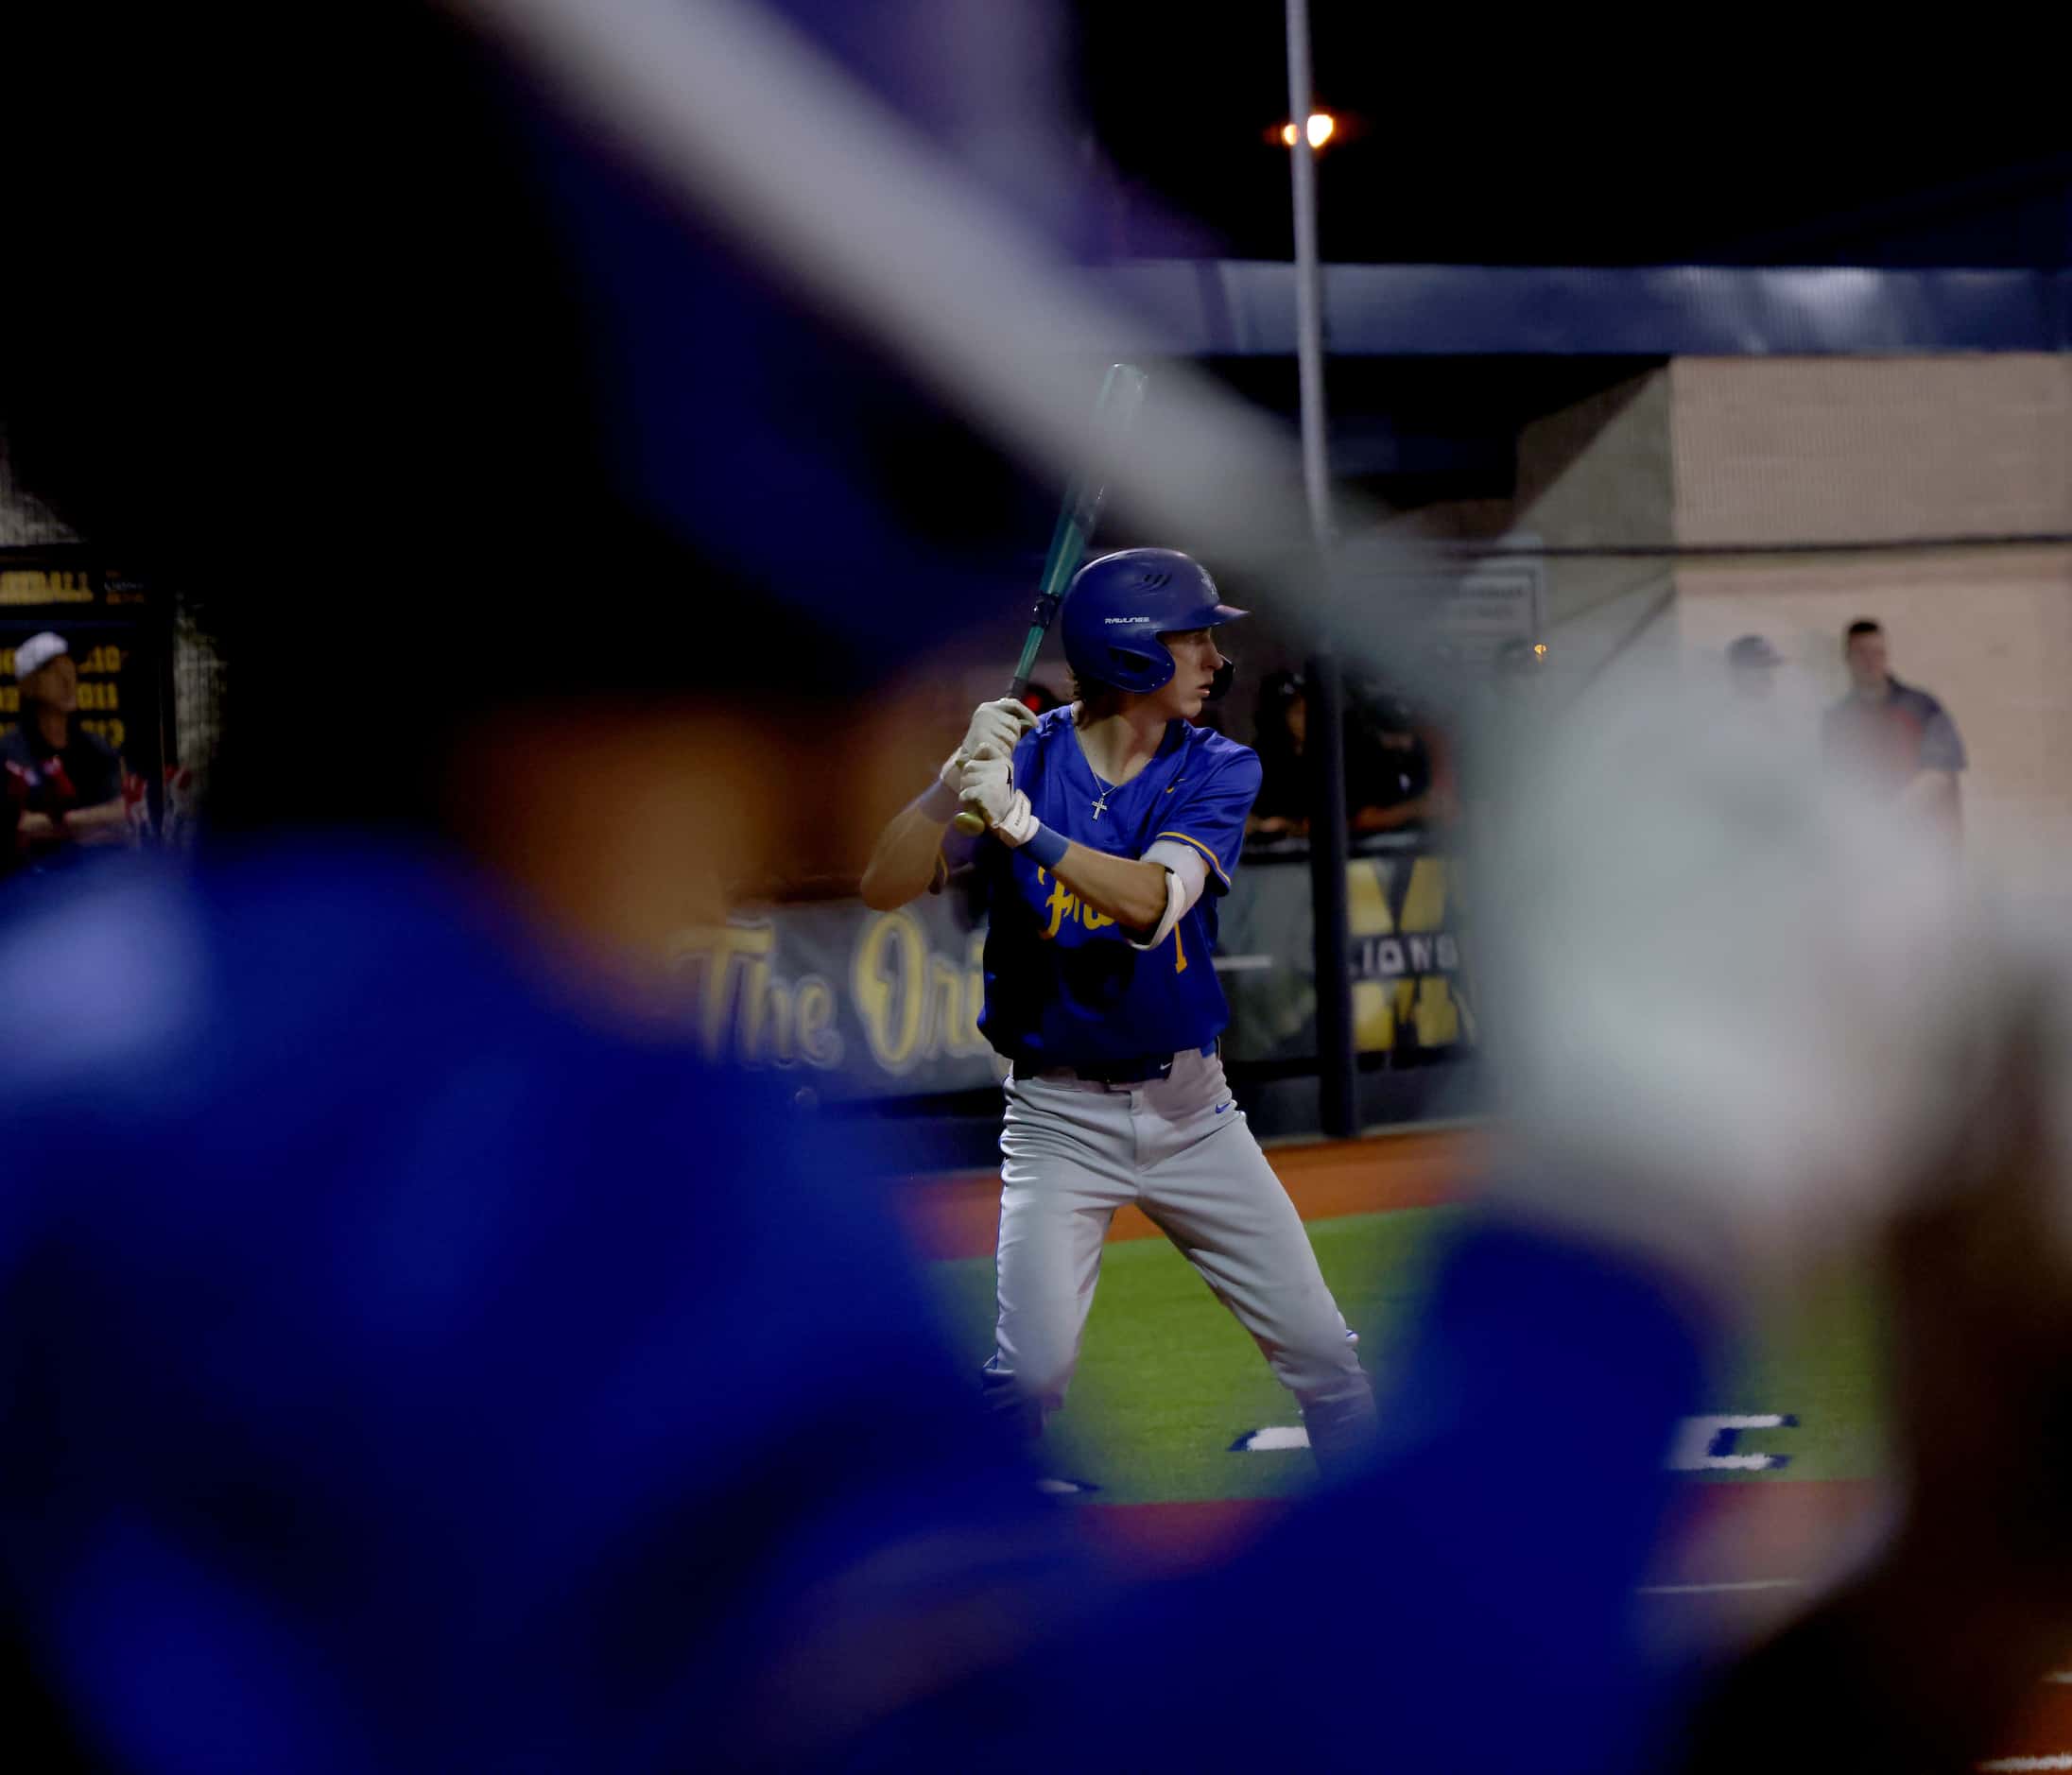 Frisco's Landon Karrh (7) bats during the top of the 7th inning as a teammate waits his turn...